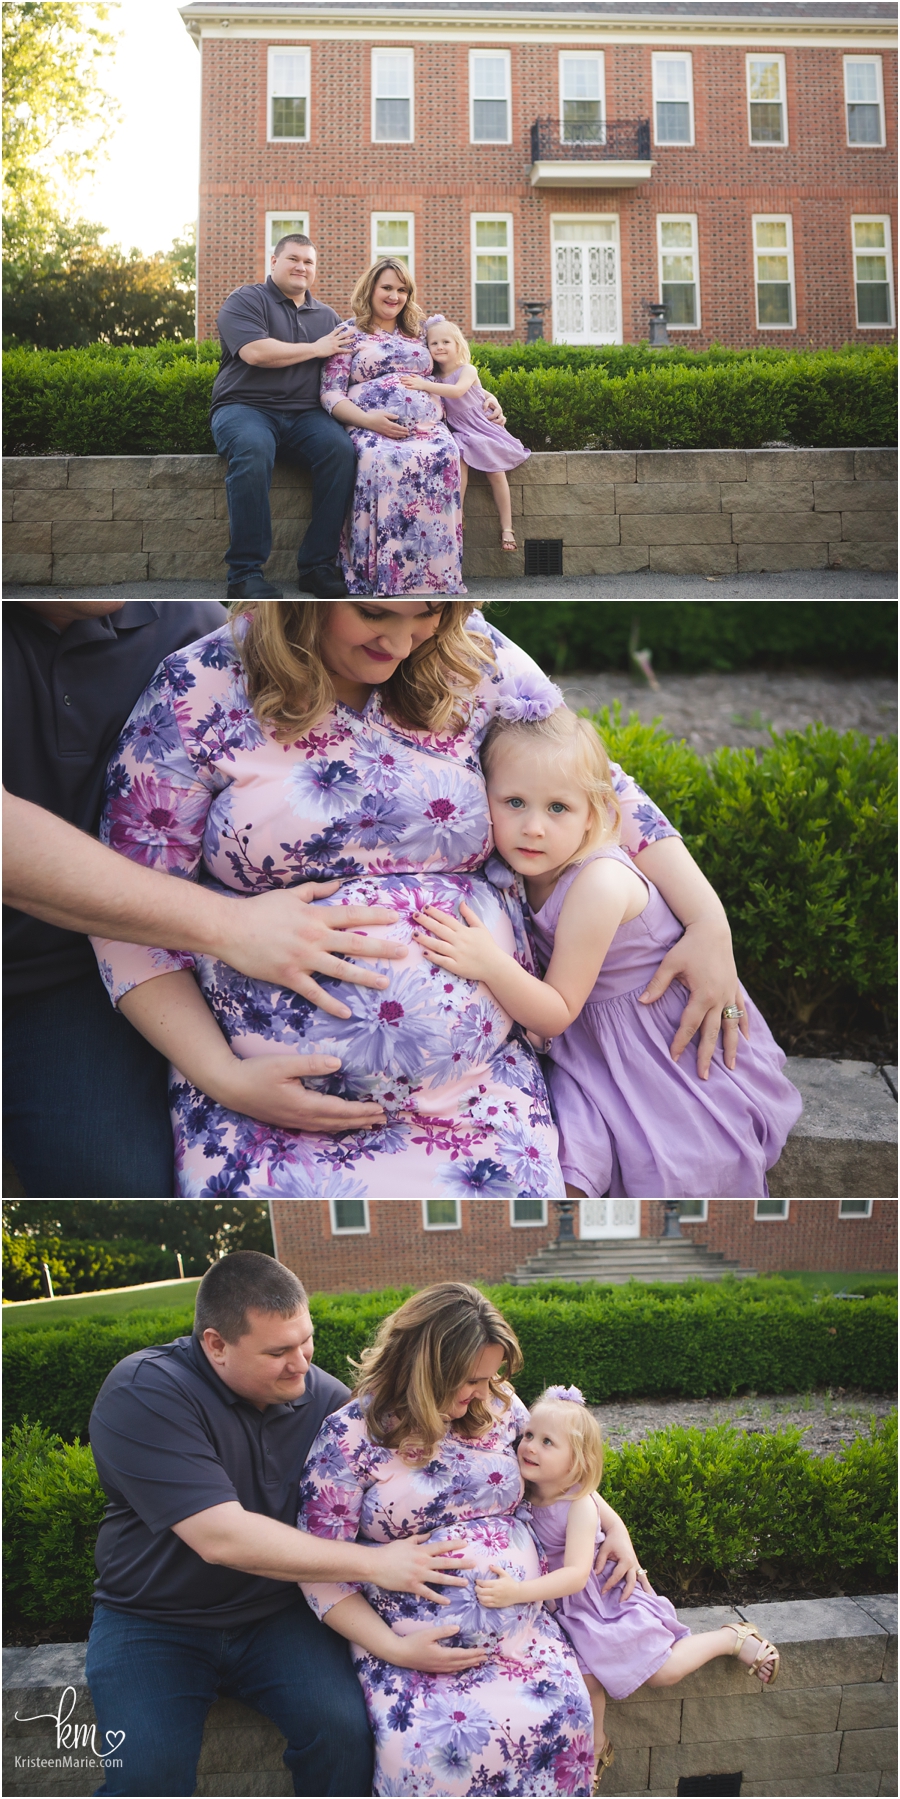 outdoor maternity session at sunset in purple dresses